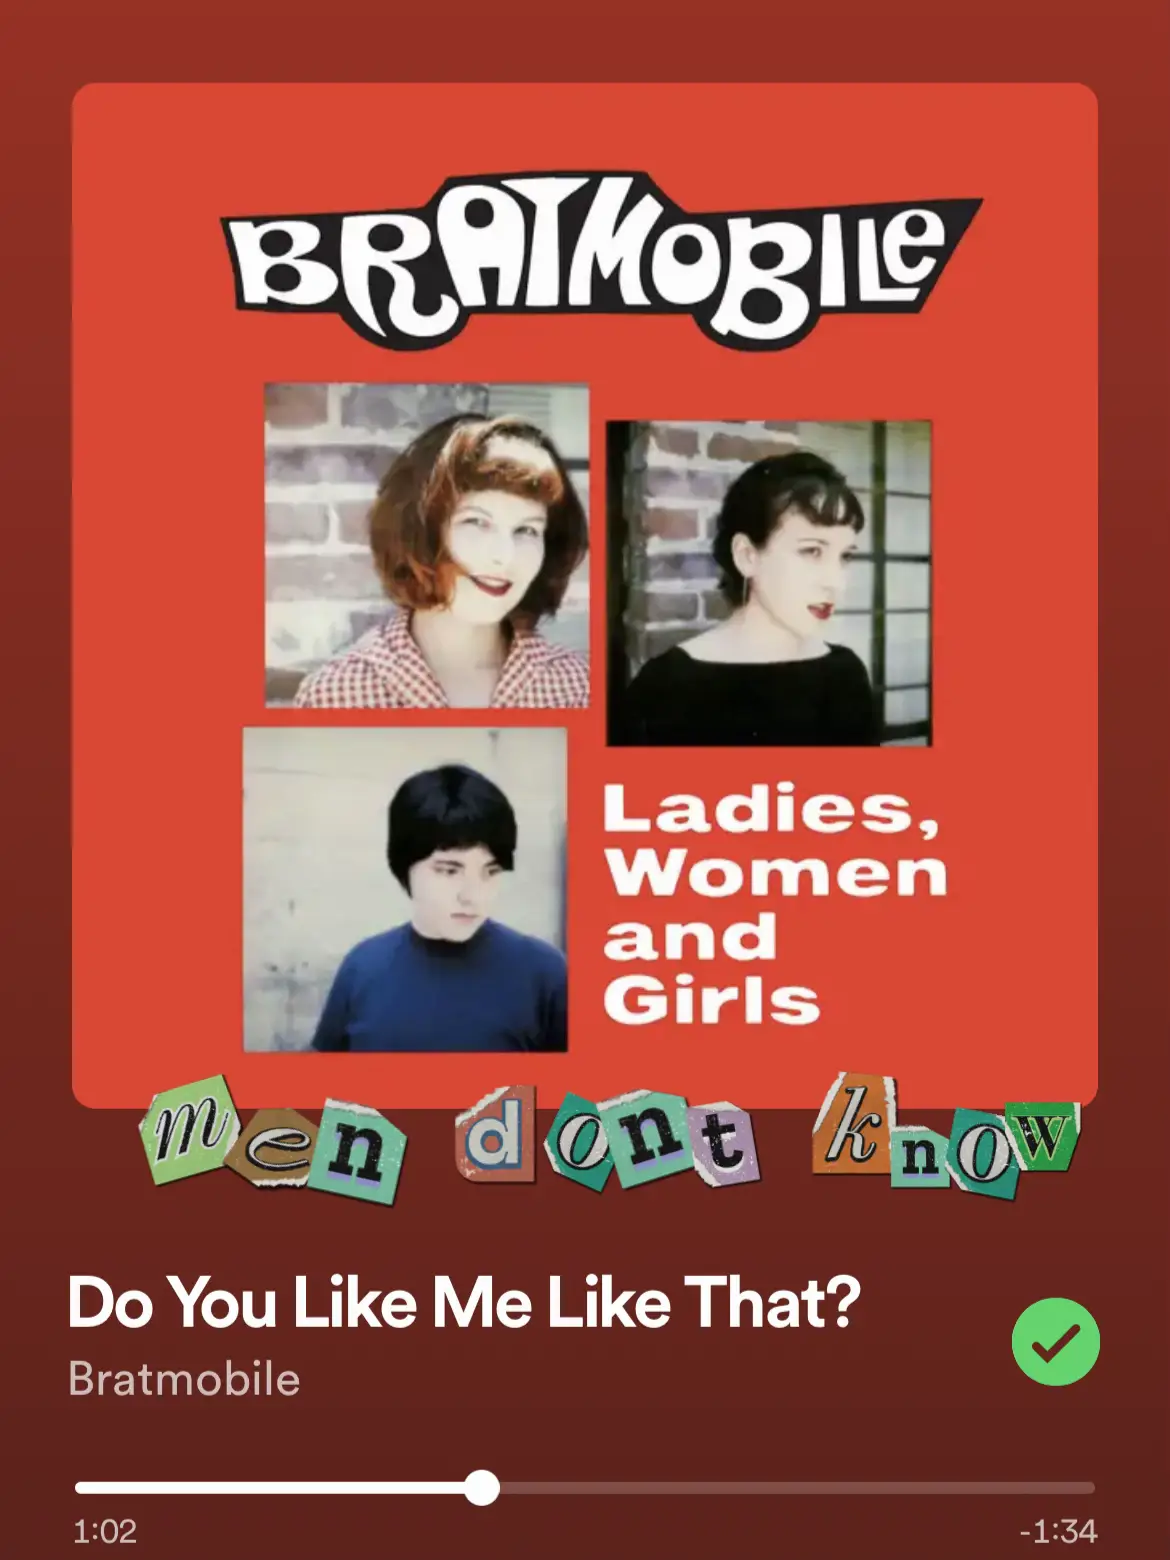  A music album cover with a cartoon woman on it.